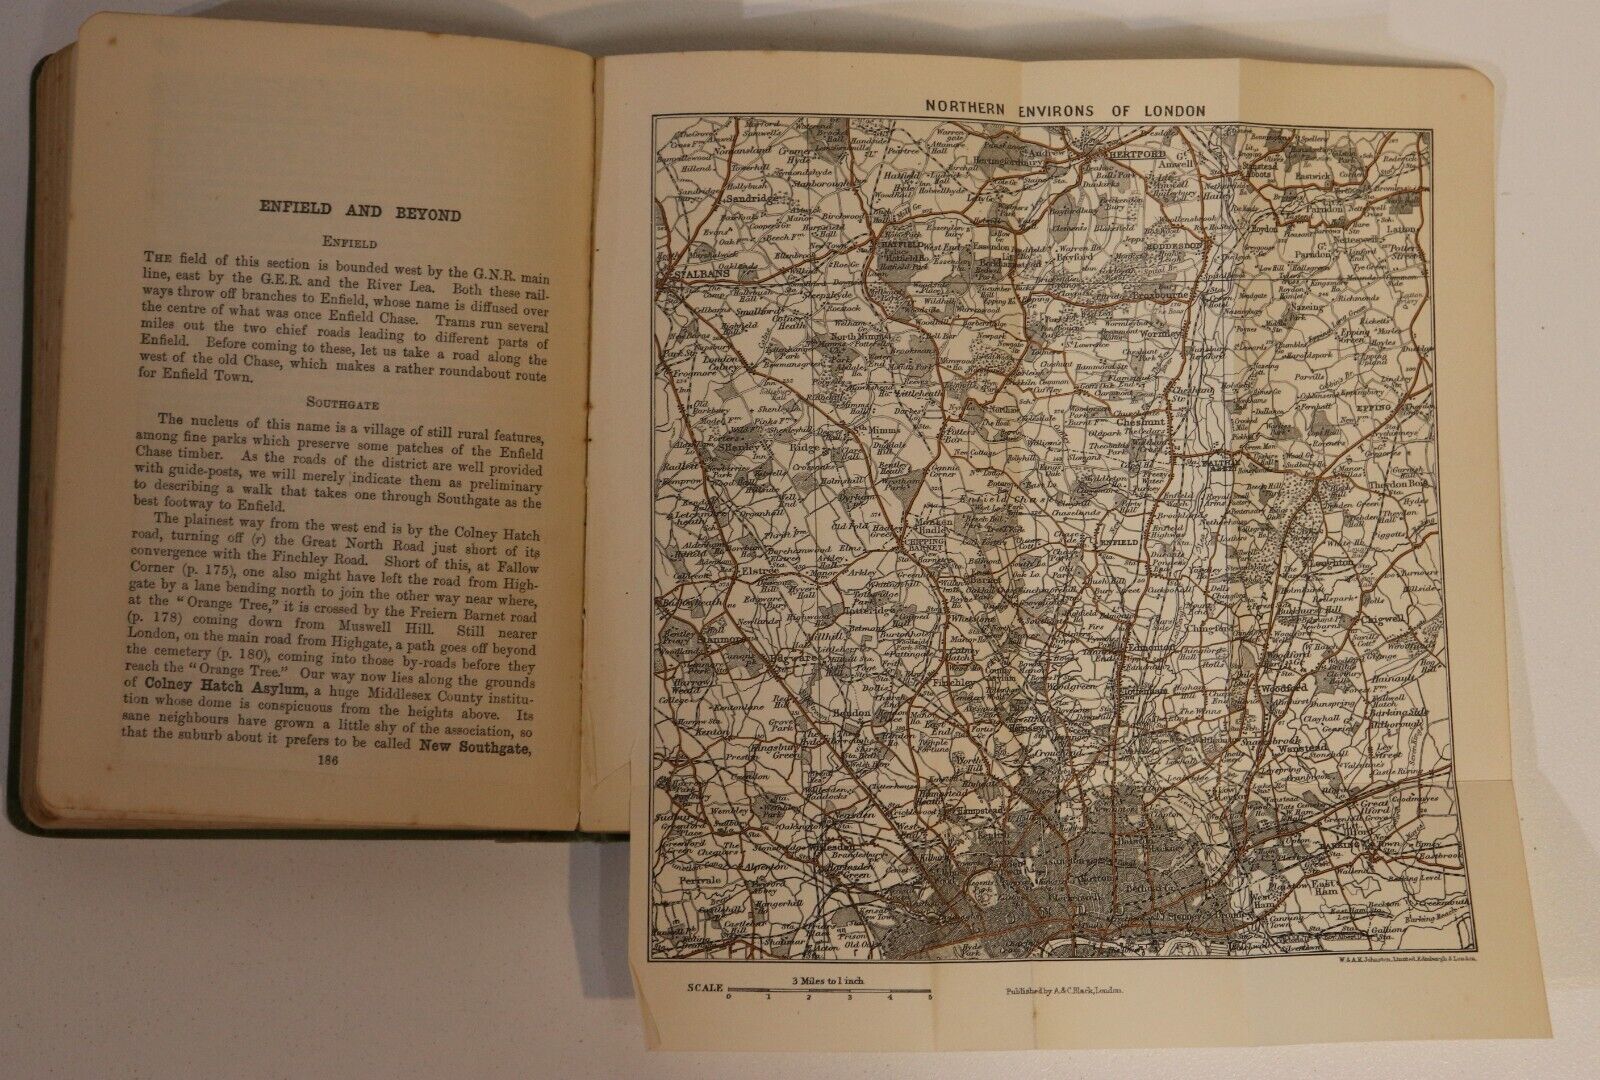 Around London by AR Hope Moncrieff - 1903 - Antique British Travel Guide w/Maps